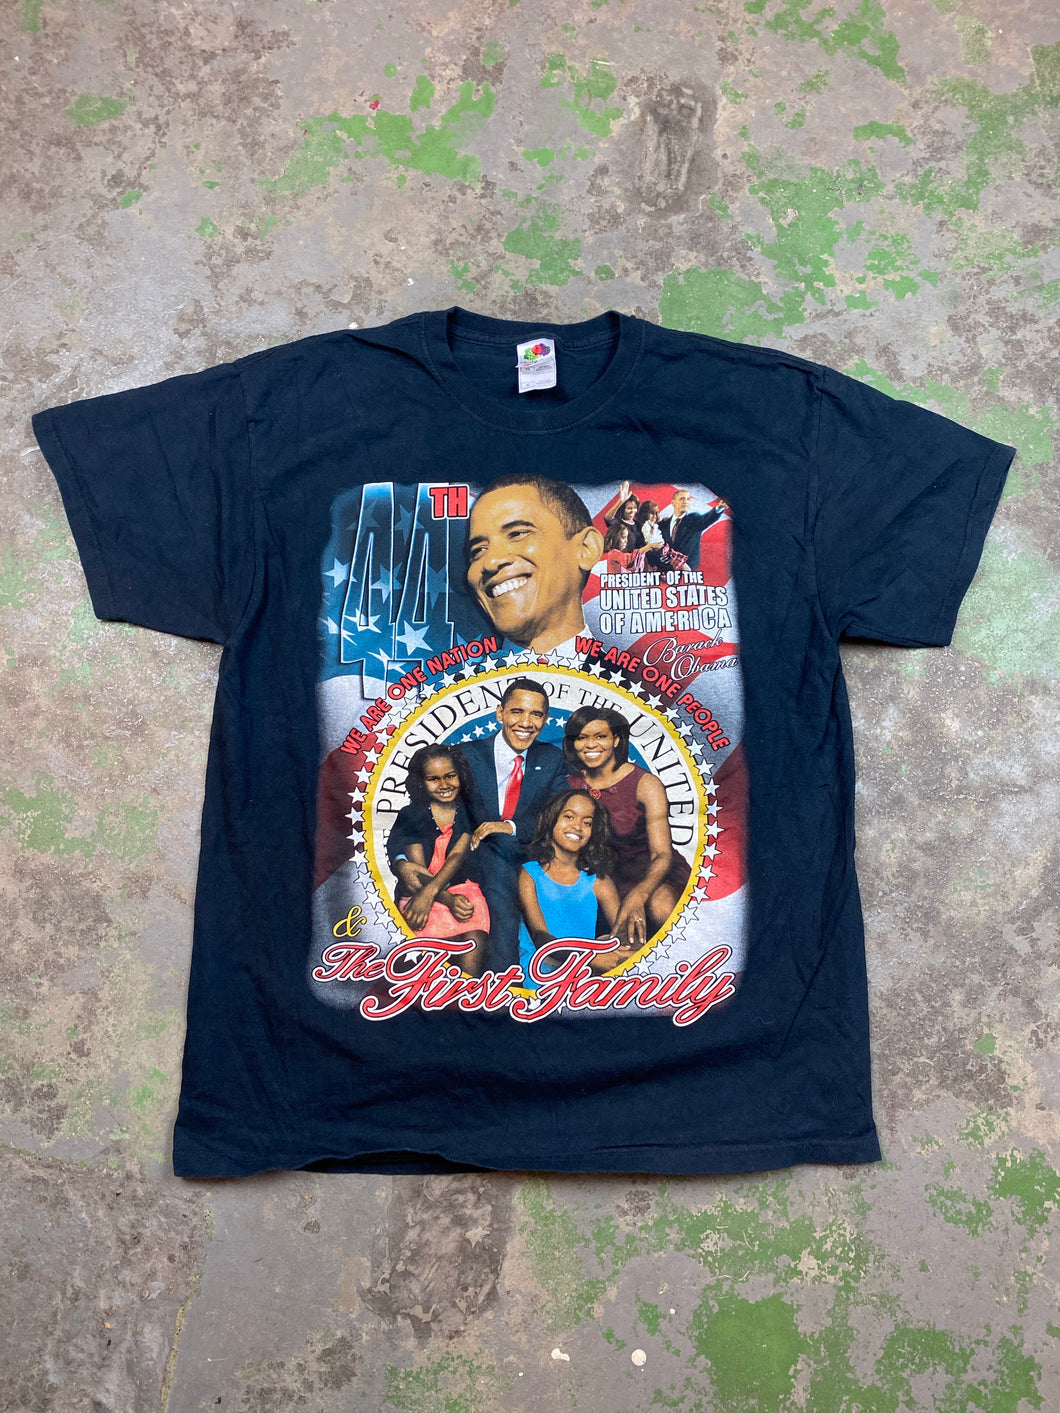 Front and back Obama t shirt